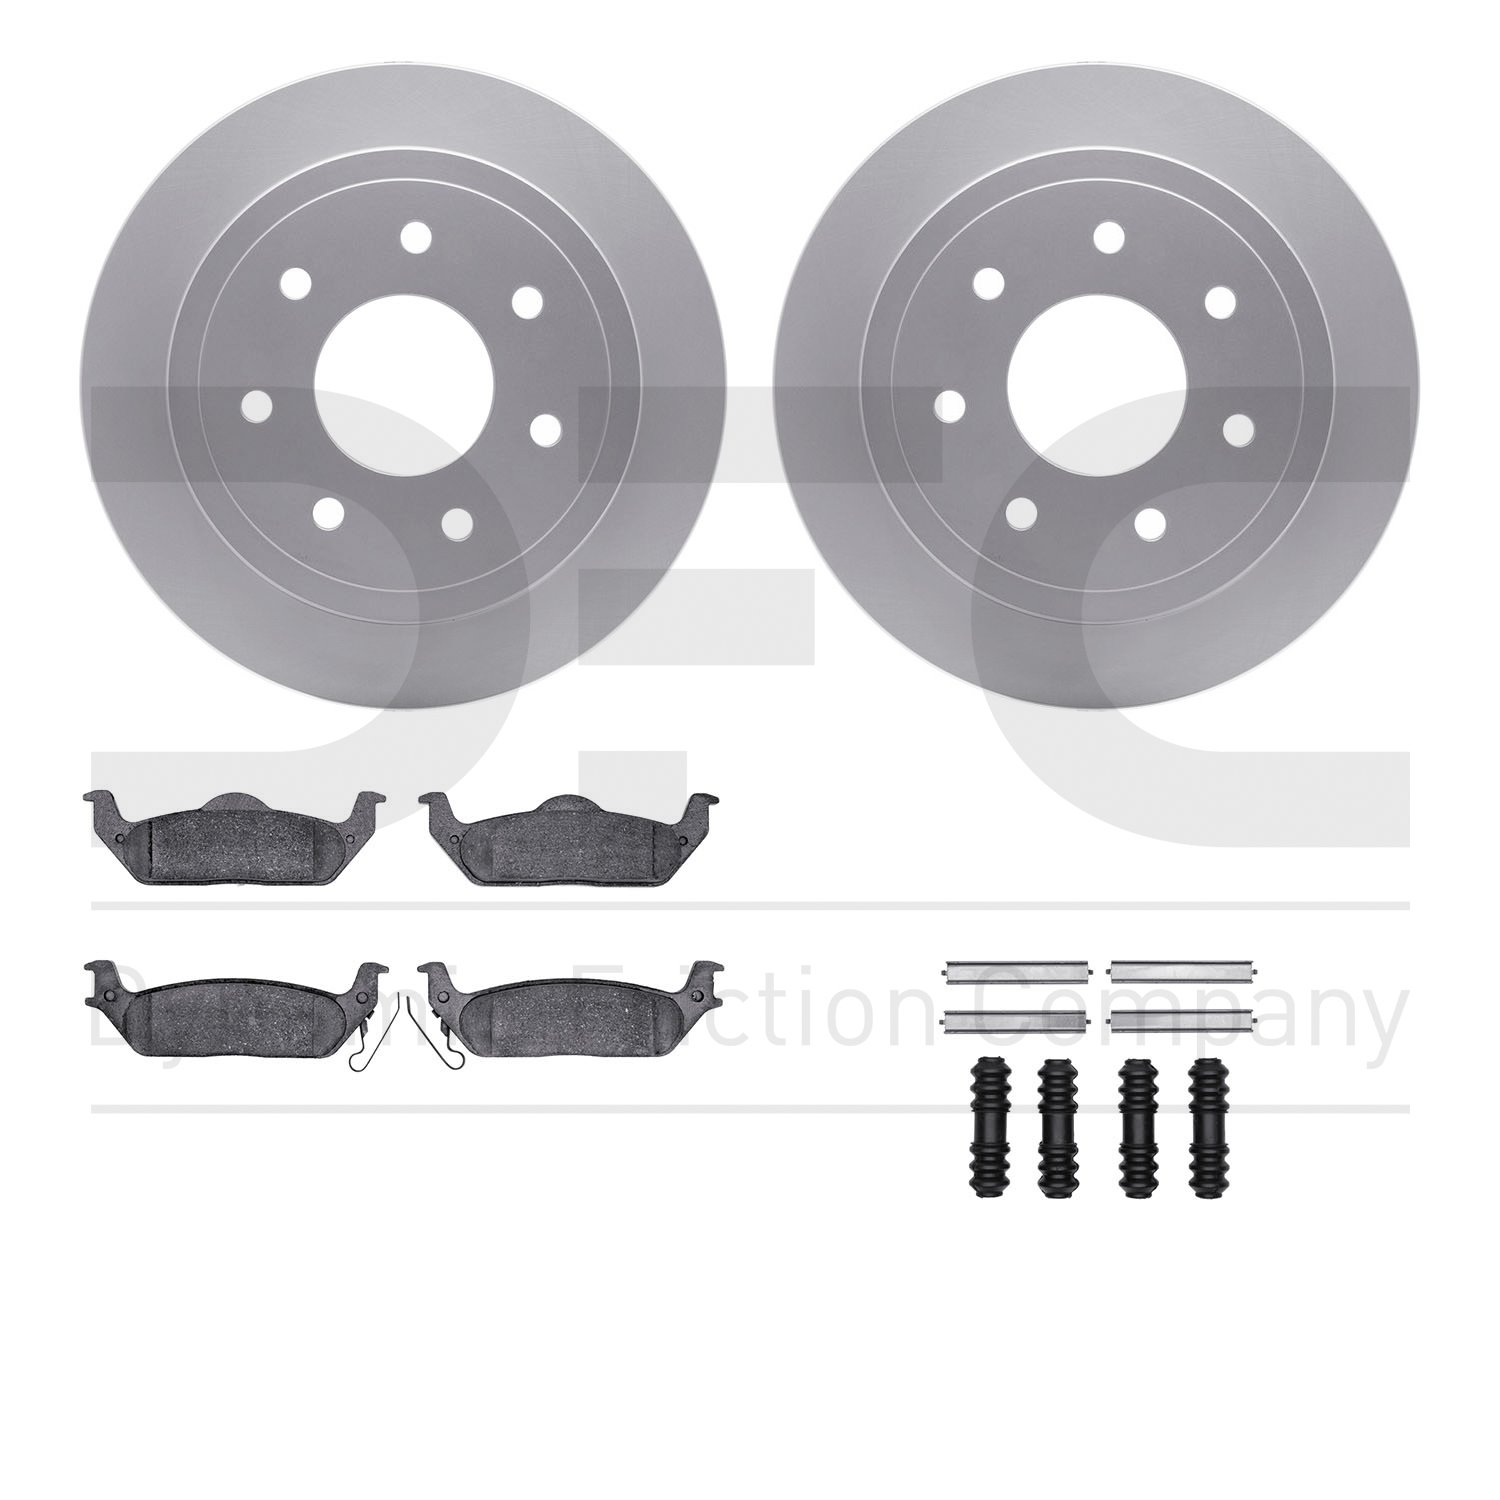 4412-54050 Geospec Brake Rotors with Ultimate-Duty Brake Pads & Hardware, 2004-2011 Ford/Lincoln/Mercury/Mazda, Position: Rear